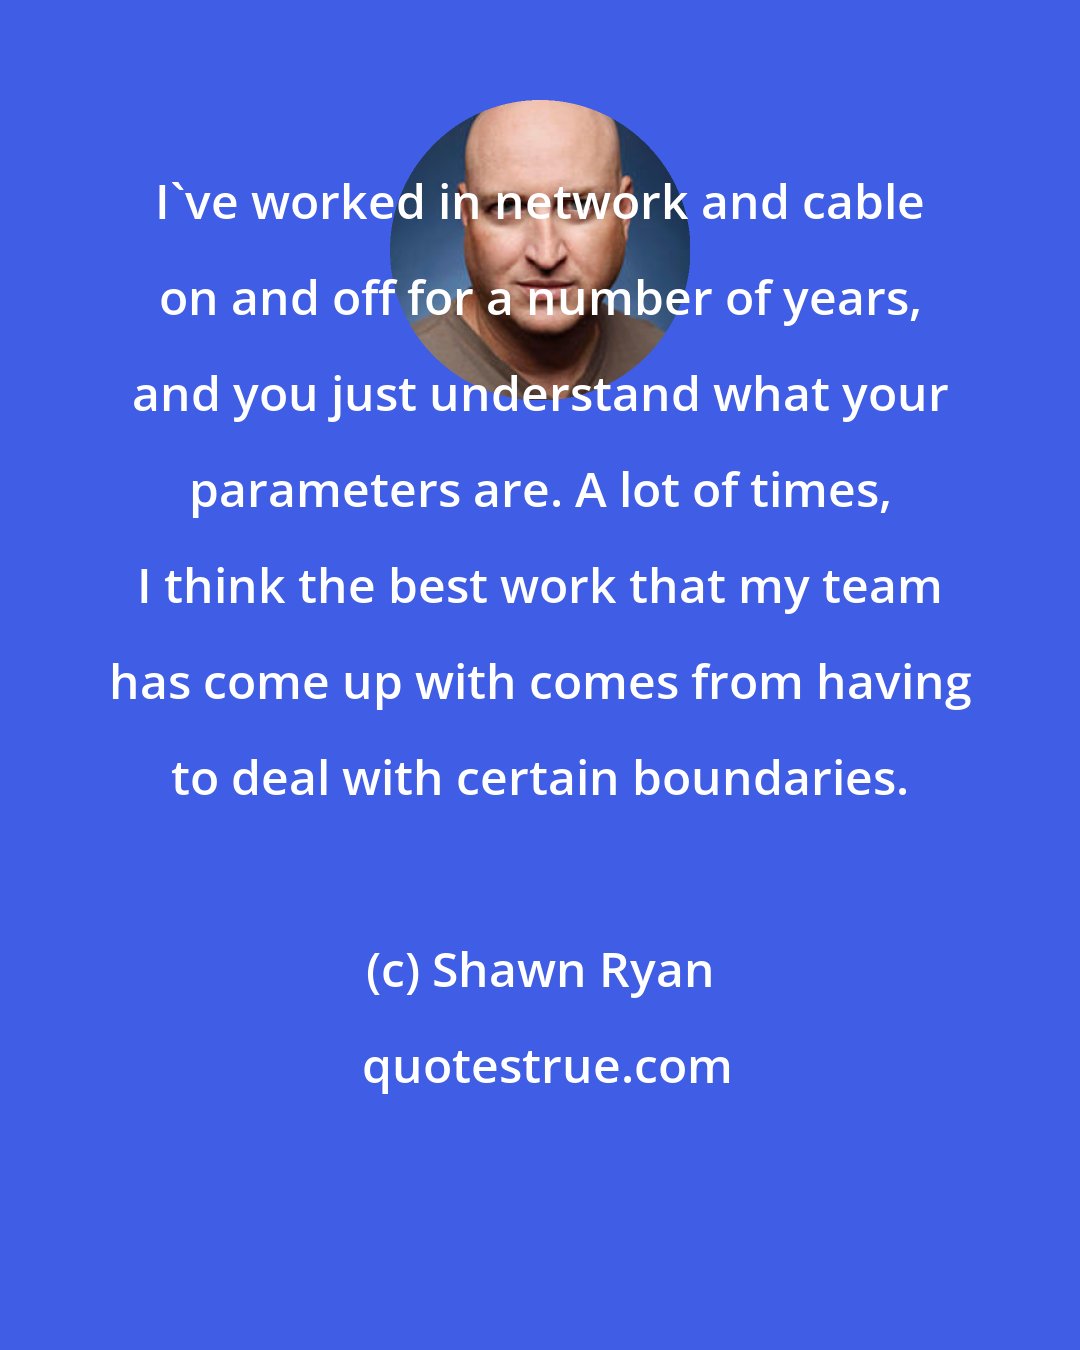 Shawn Ryan: I've worked in network and cable on and off for a number of years, and you just understand what your parameters are. A lot of times, I think the best work that my team has come up with comes from having to deal with certain boundaries.